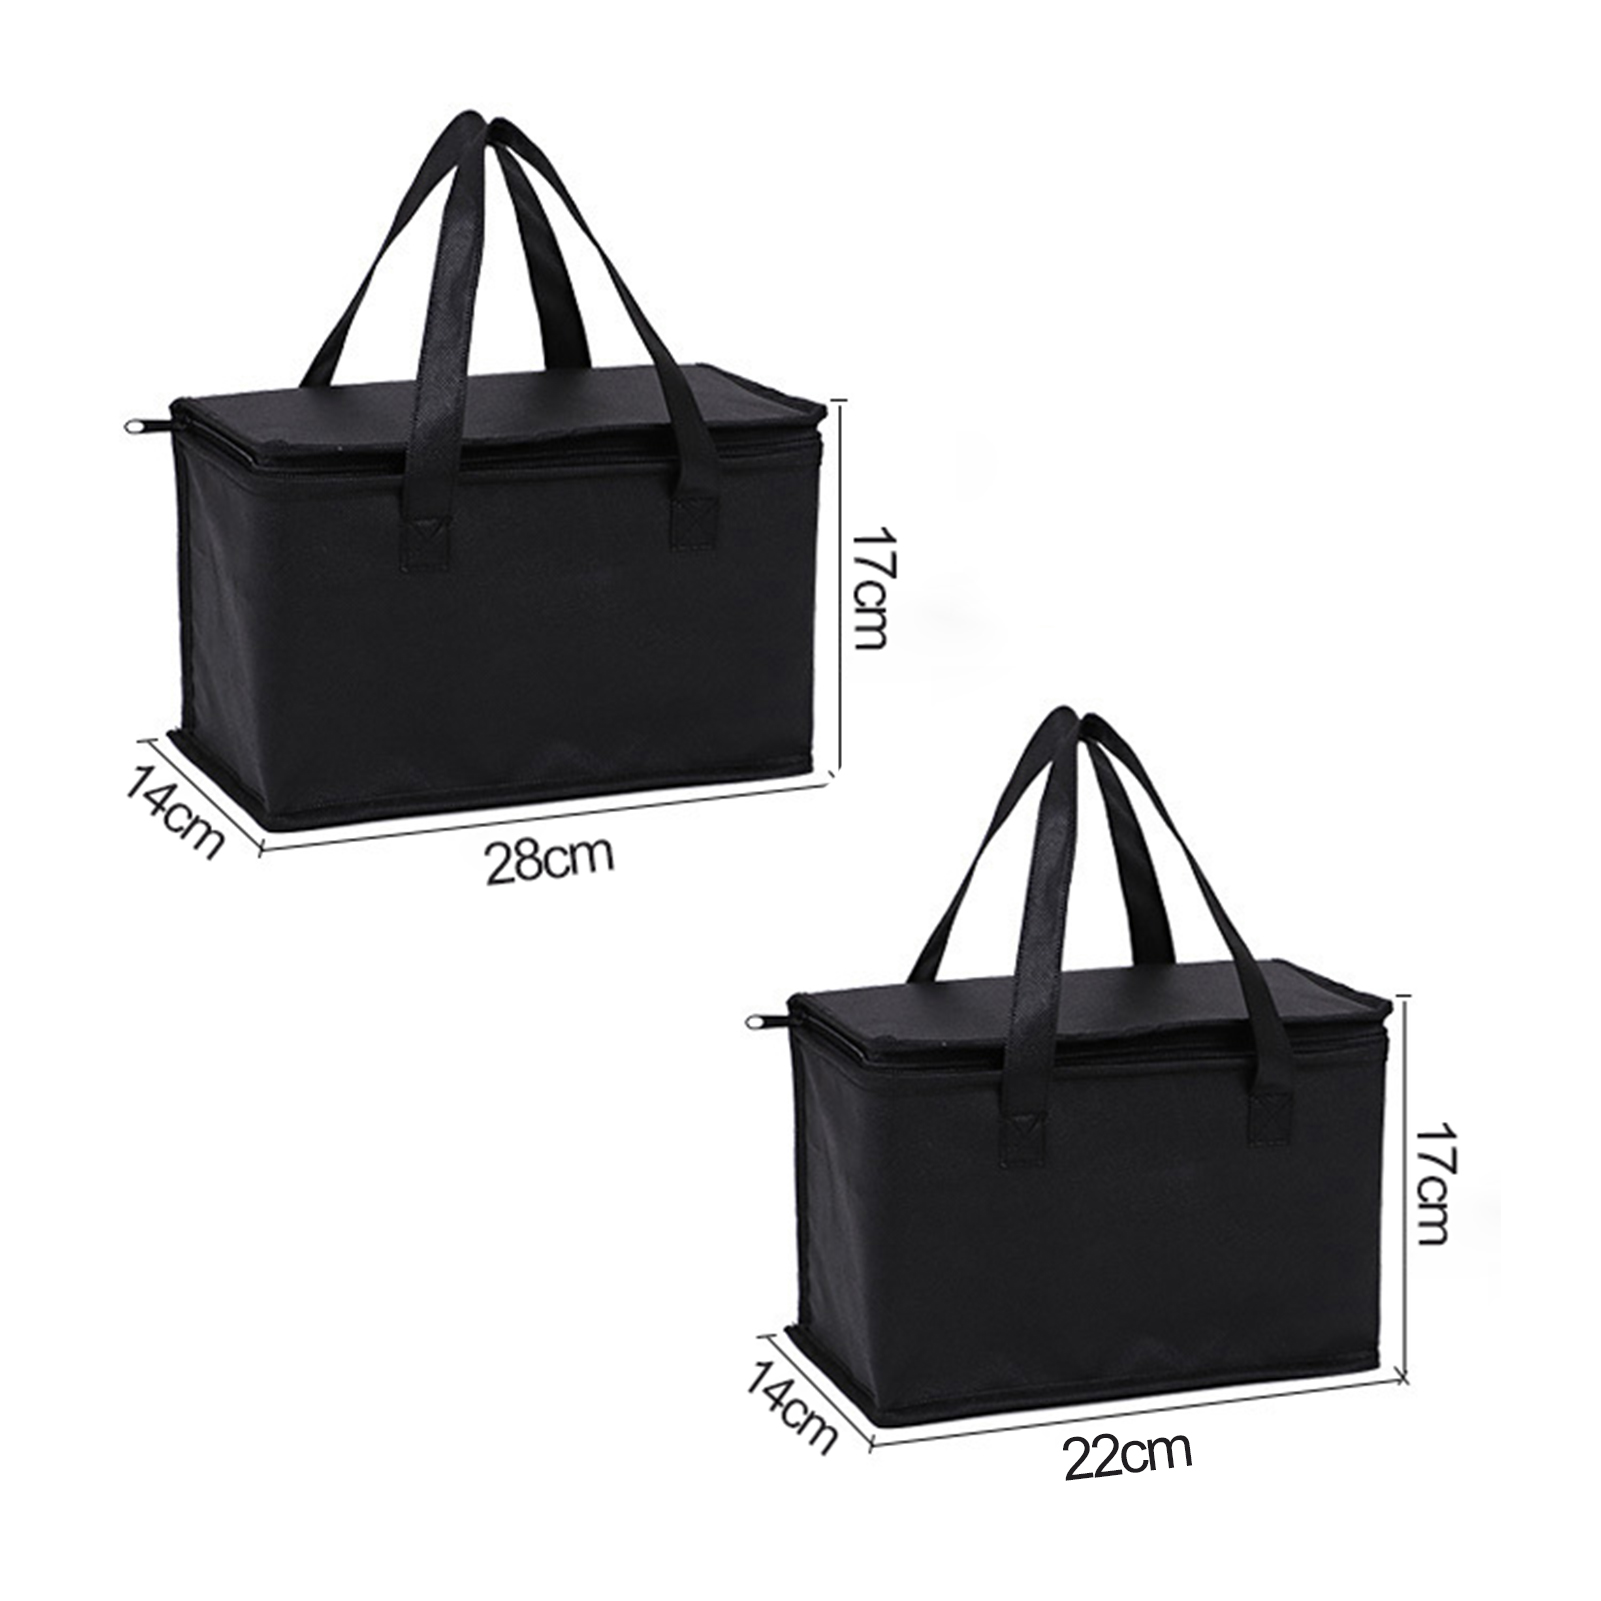 Ludlz Large Lunch Bag Insulated Lunch Box Soft Cooler Cooling Tote for Adult Men Women, Lunch Cooler Bag Folding Insulation Picnic Pack Food Thermal Bag Carrier Pouch - image 5 of 7